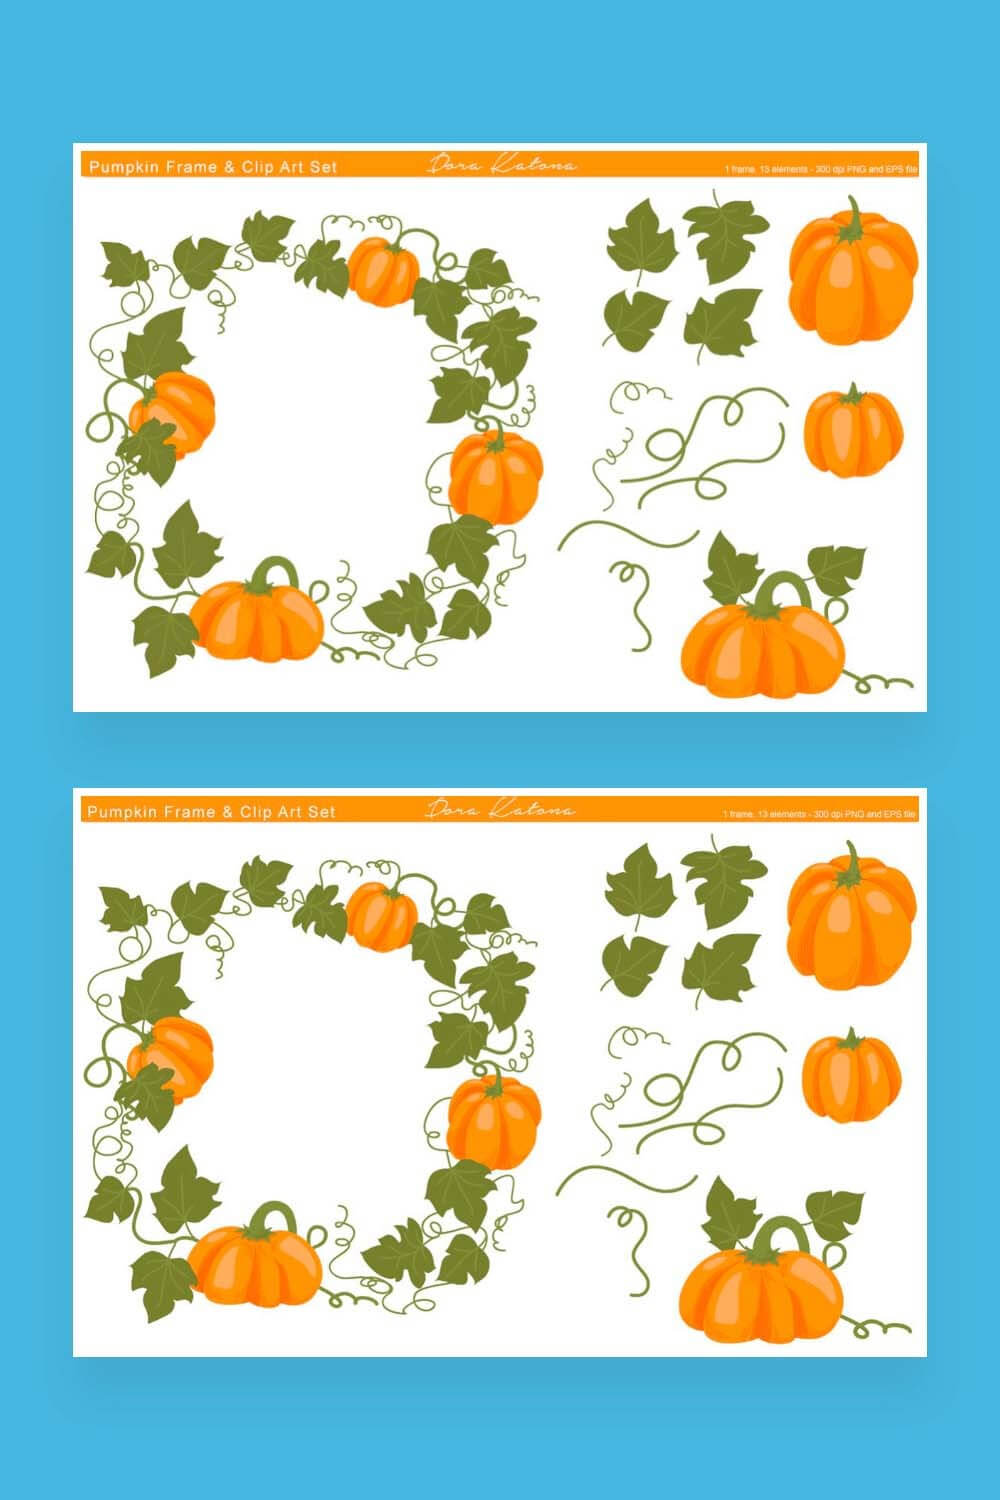 Picture with pumpkin frame and clipart for Pinterest on a turquoise background.